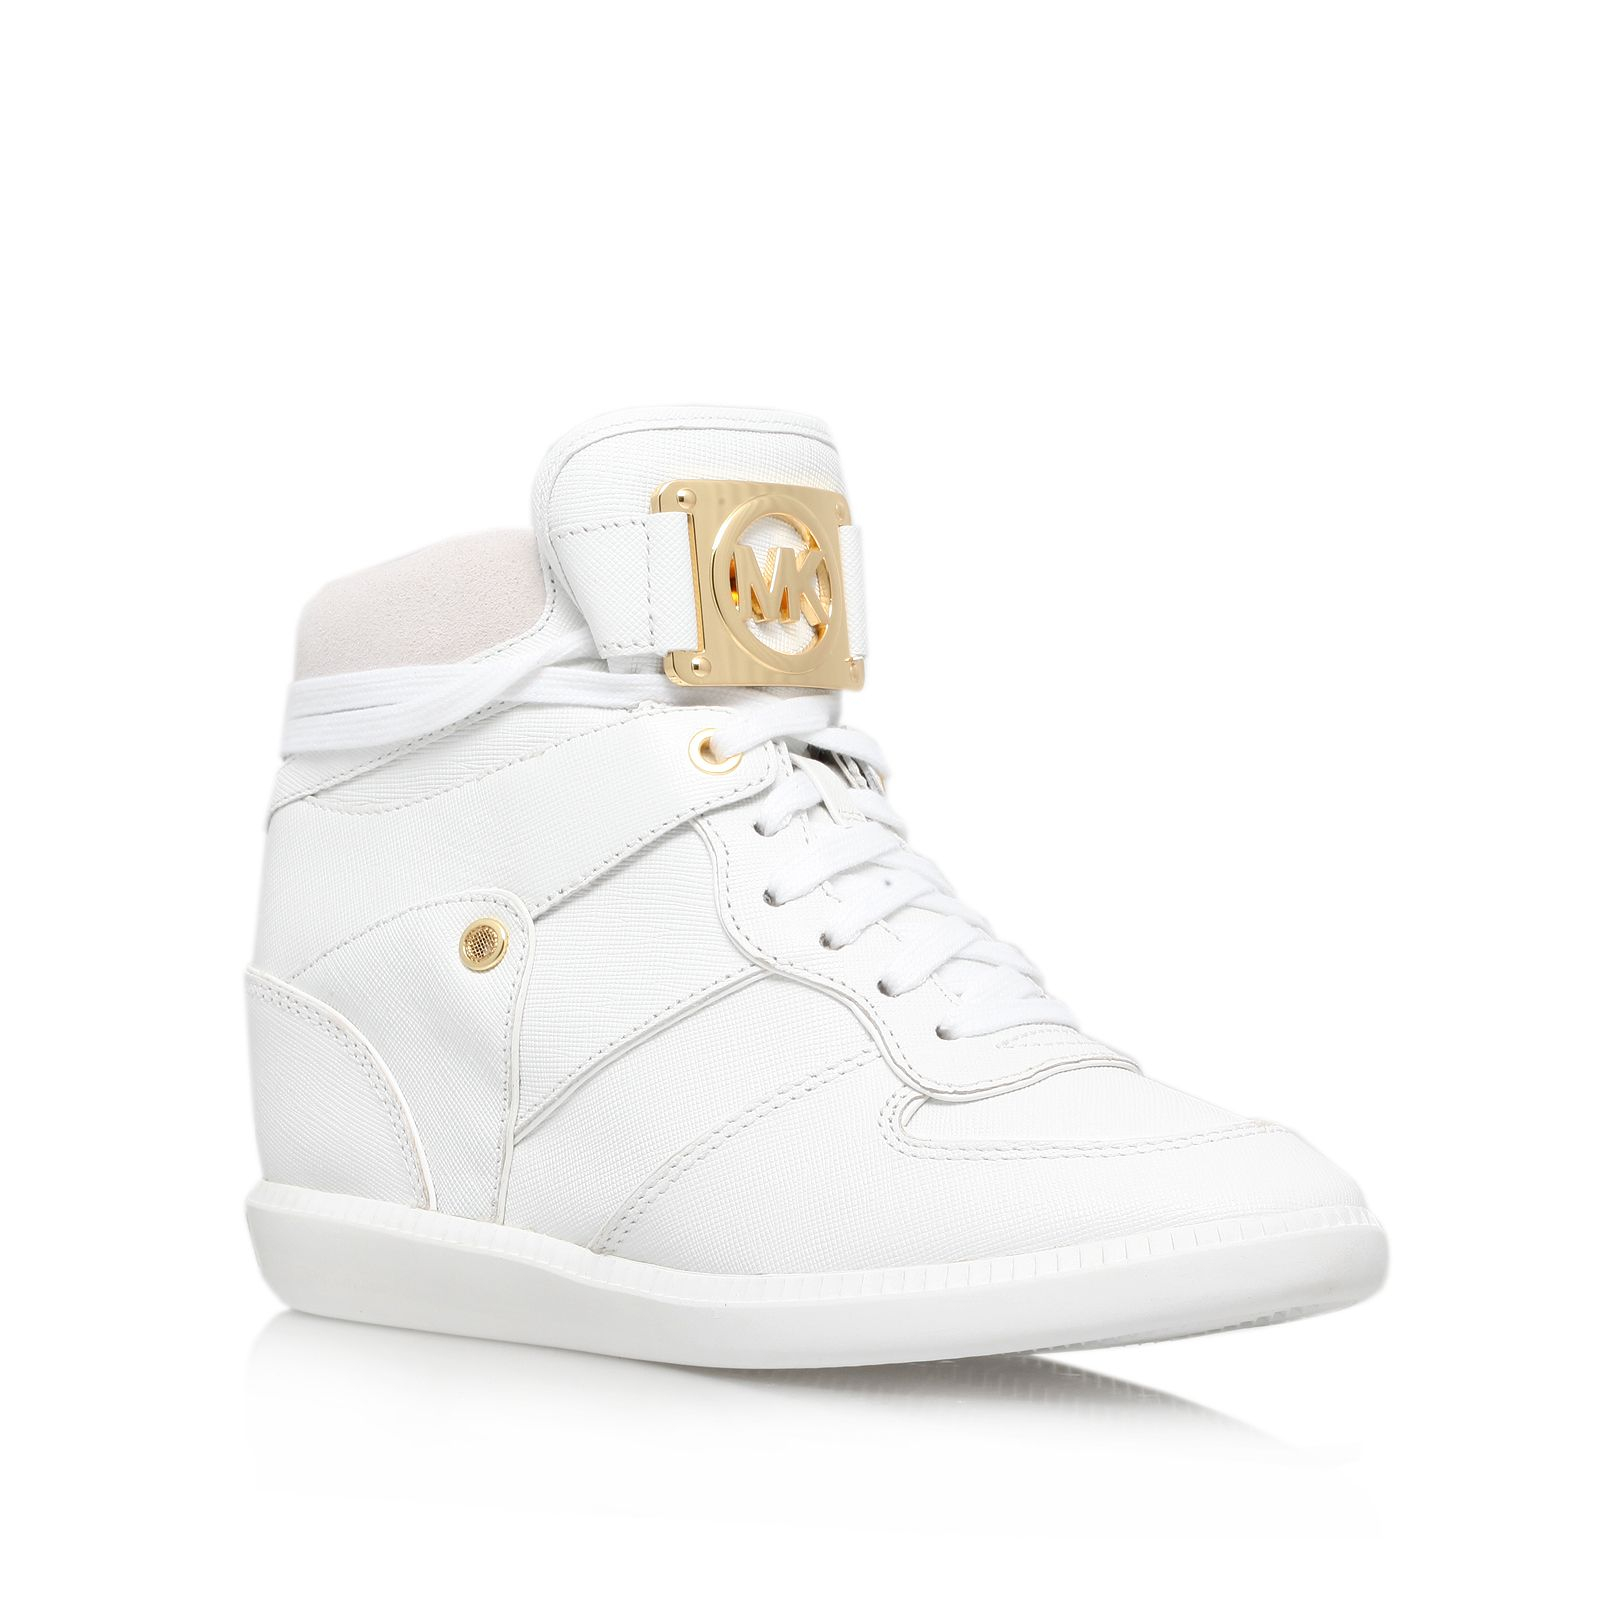 Michael kors Nikko High Top Trainers in White | Lyst